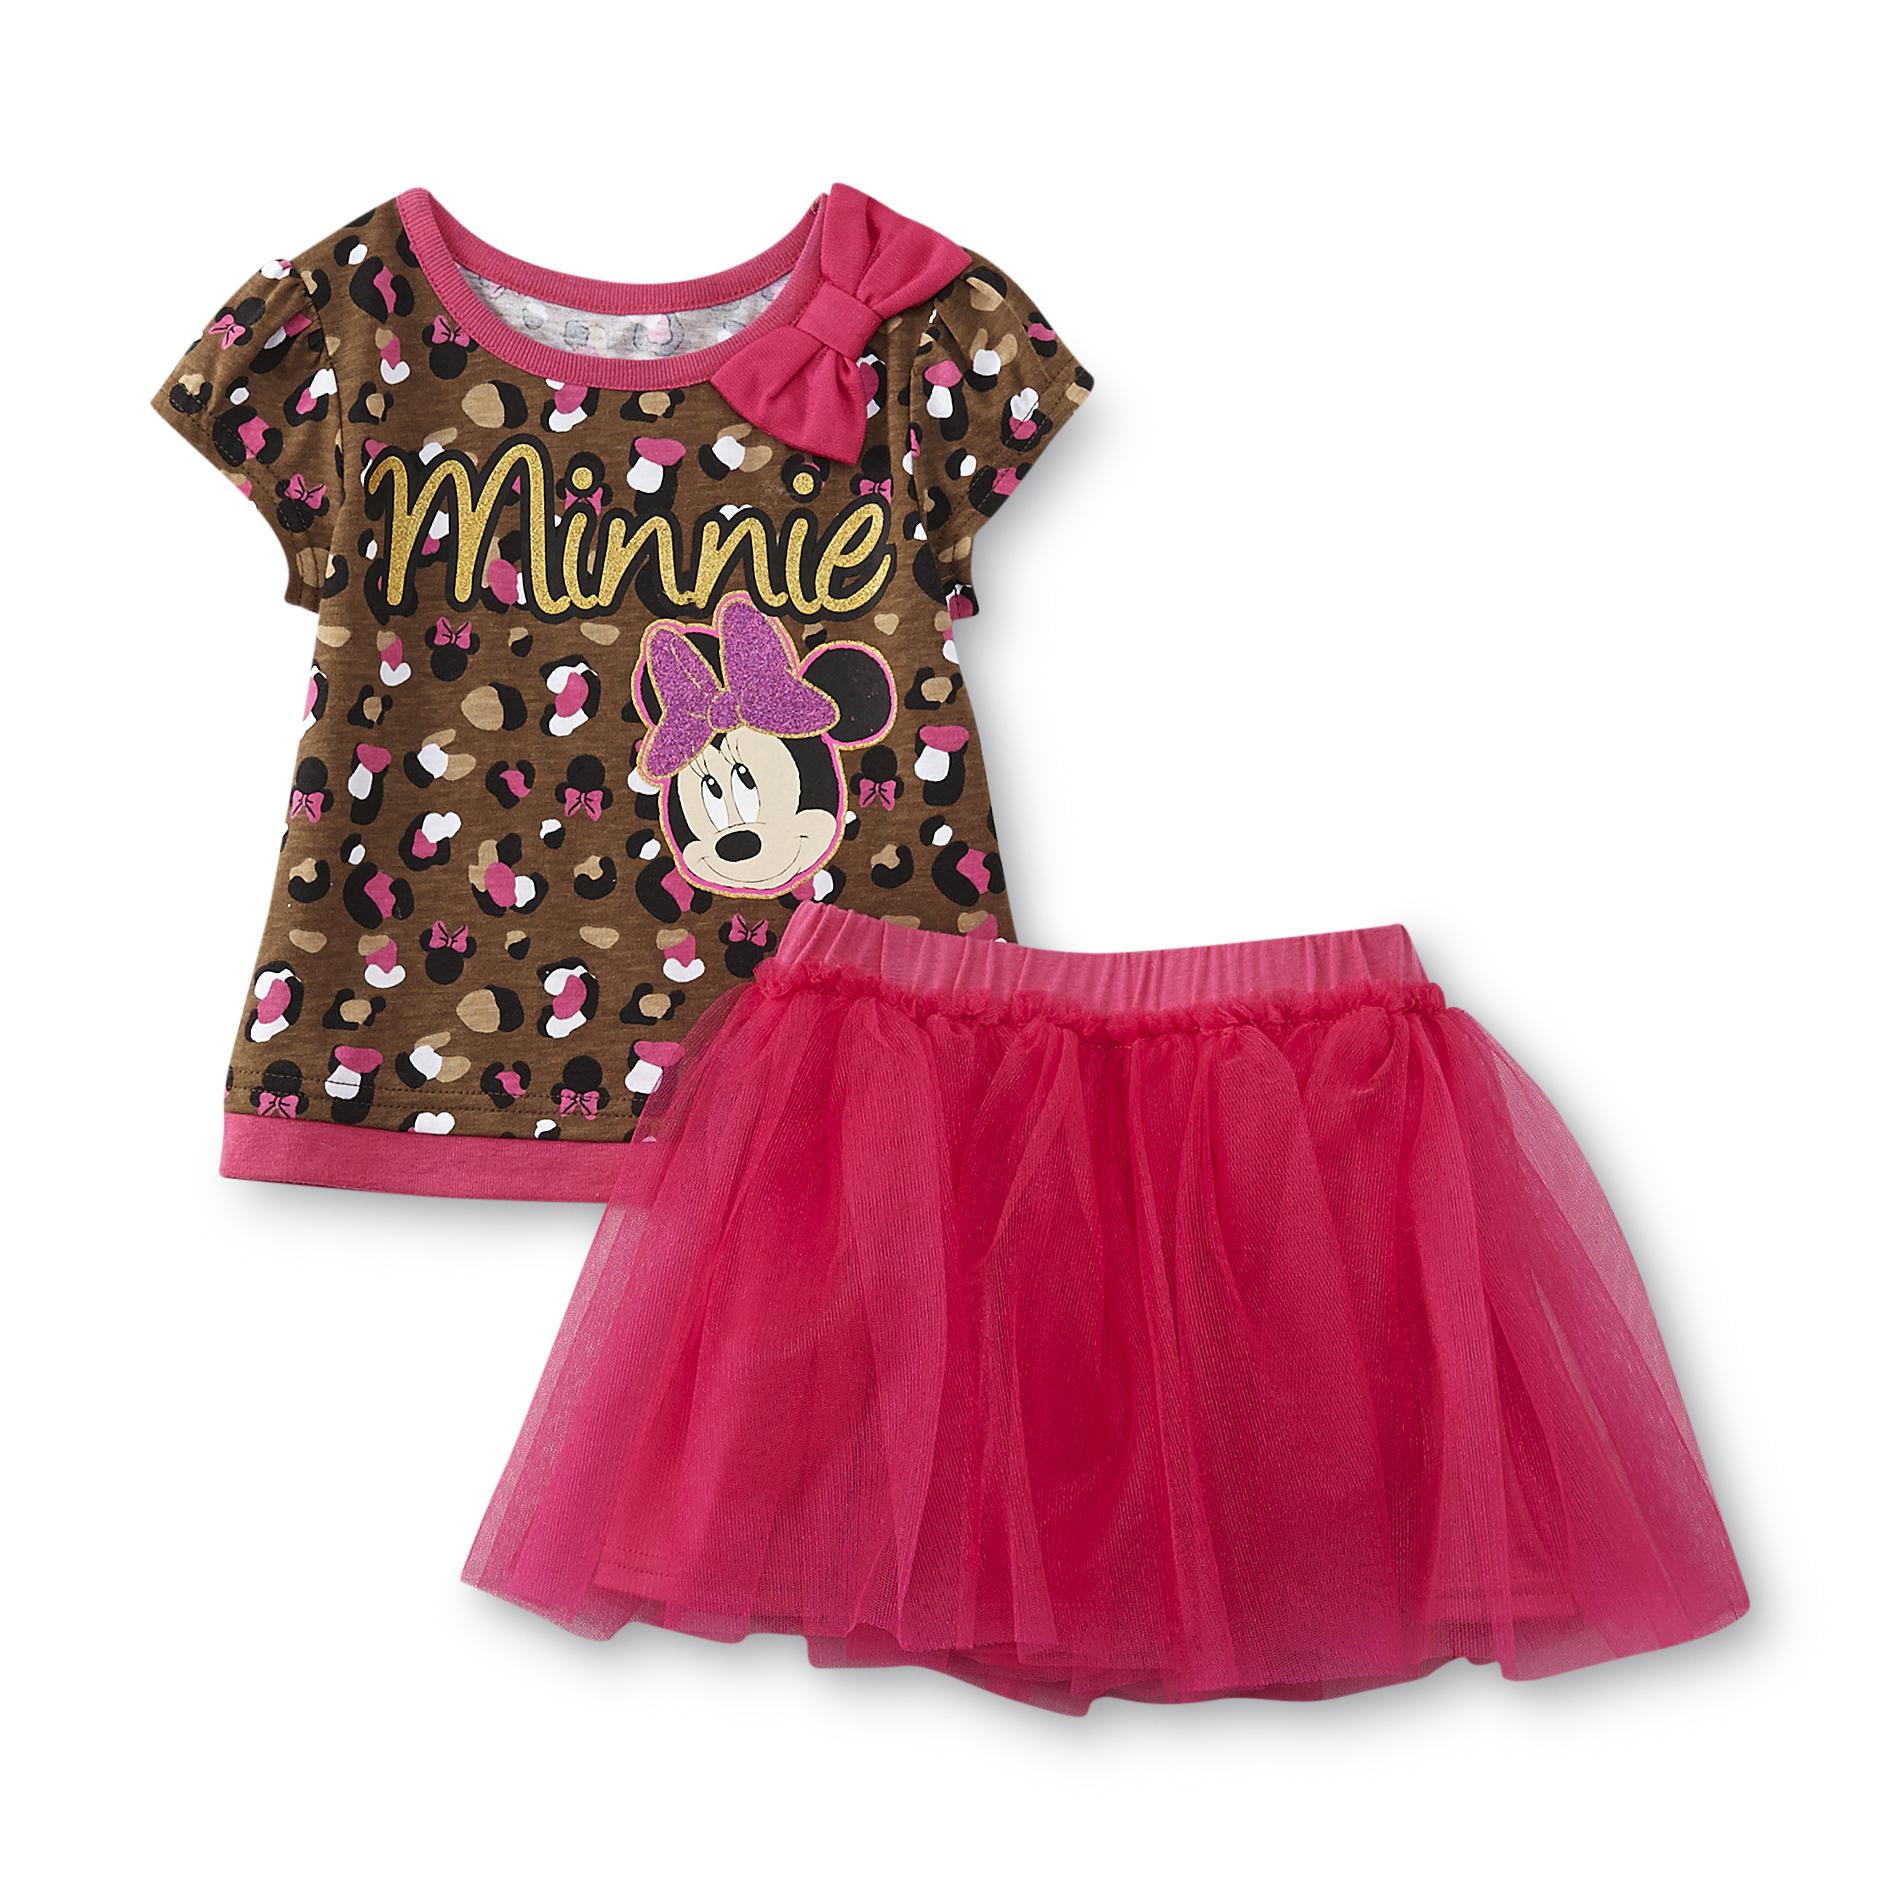 Minnie Mouse Toddler Girl's Graphic Top & Tutu Skirt